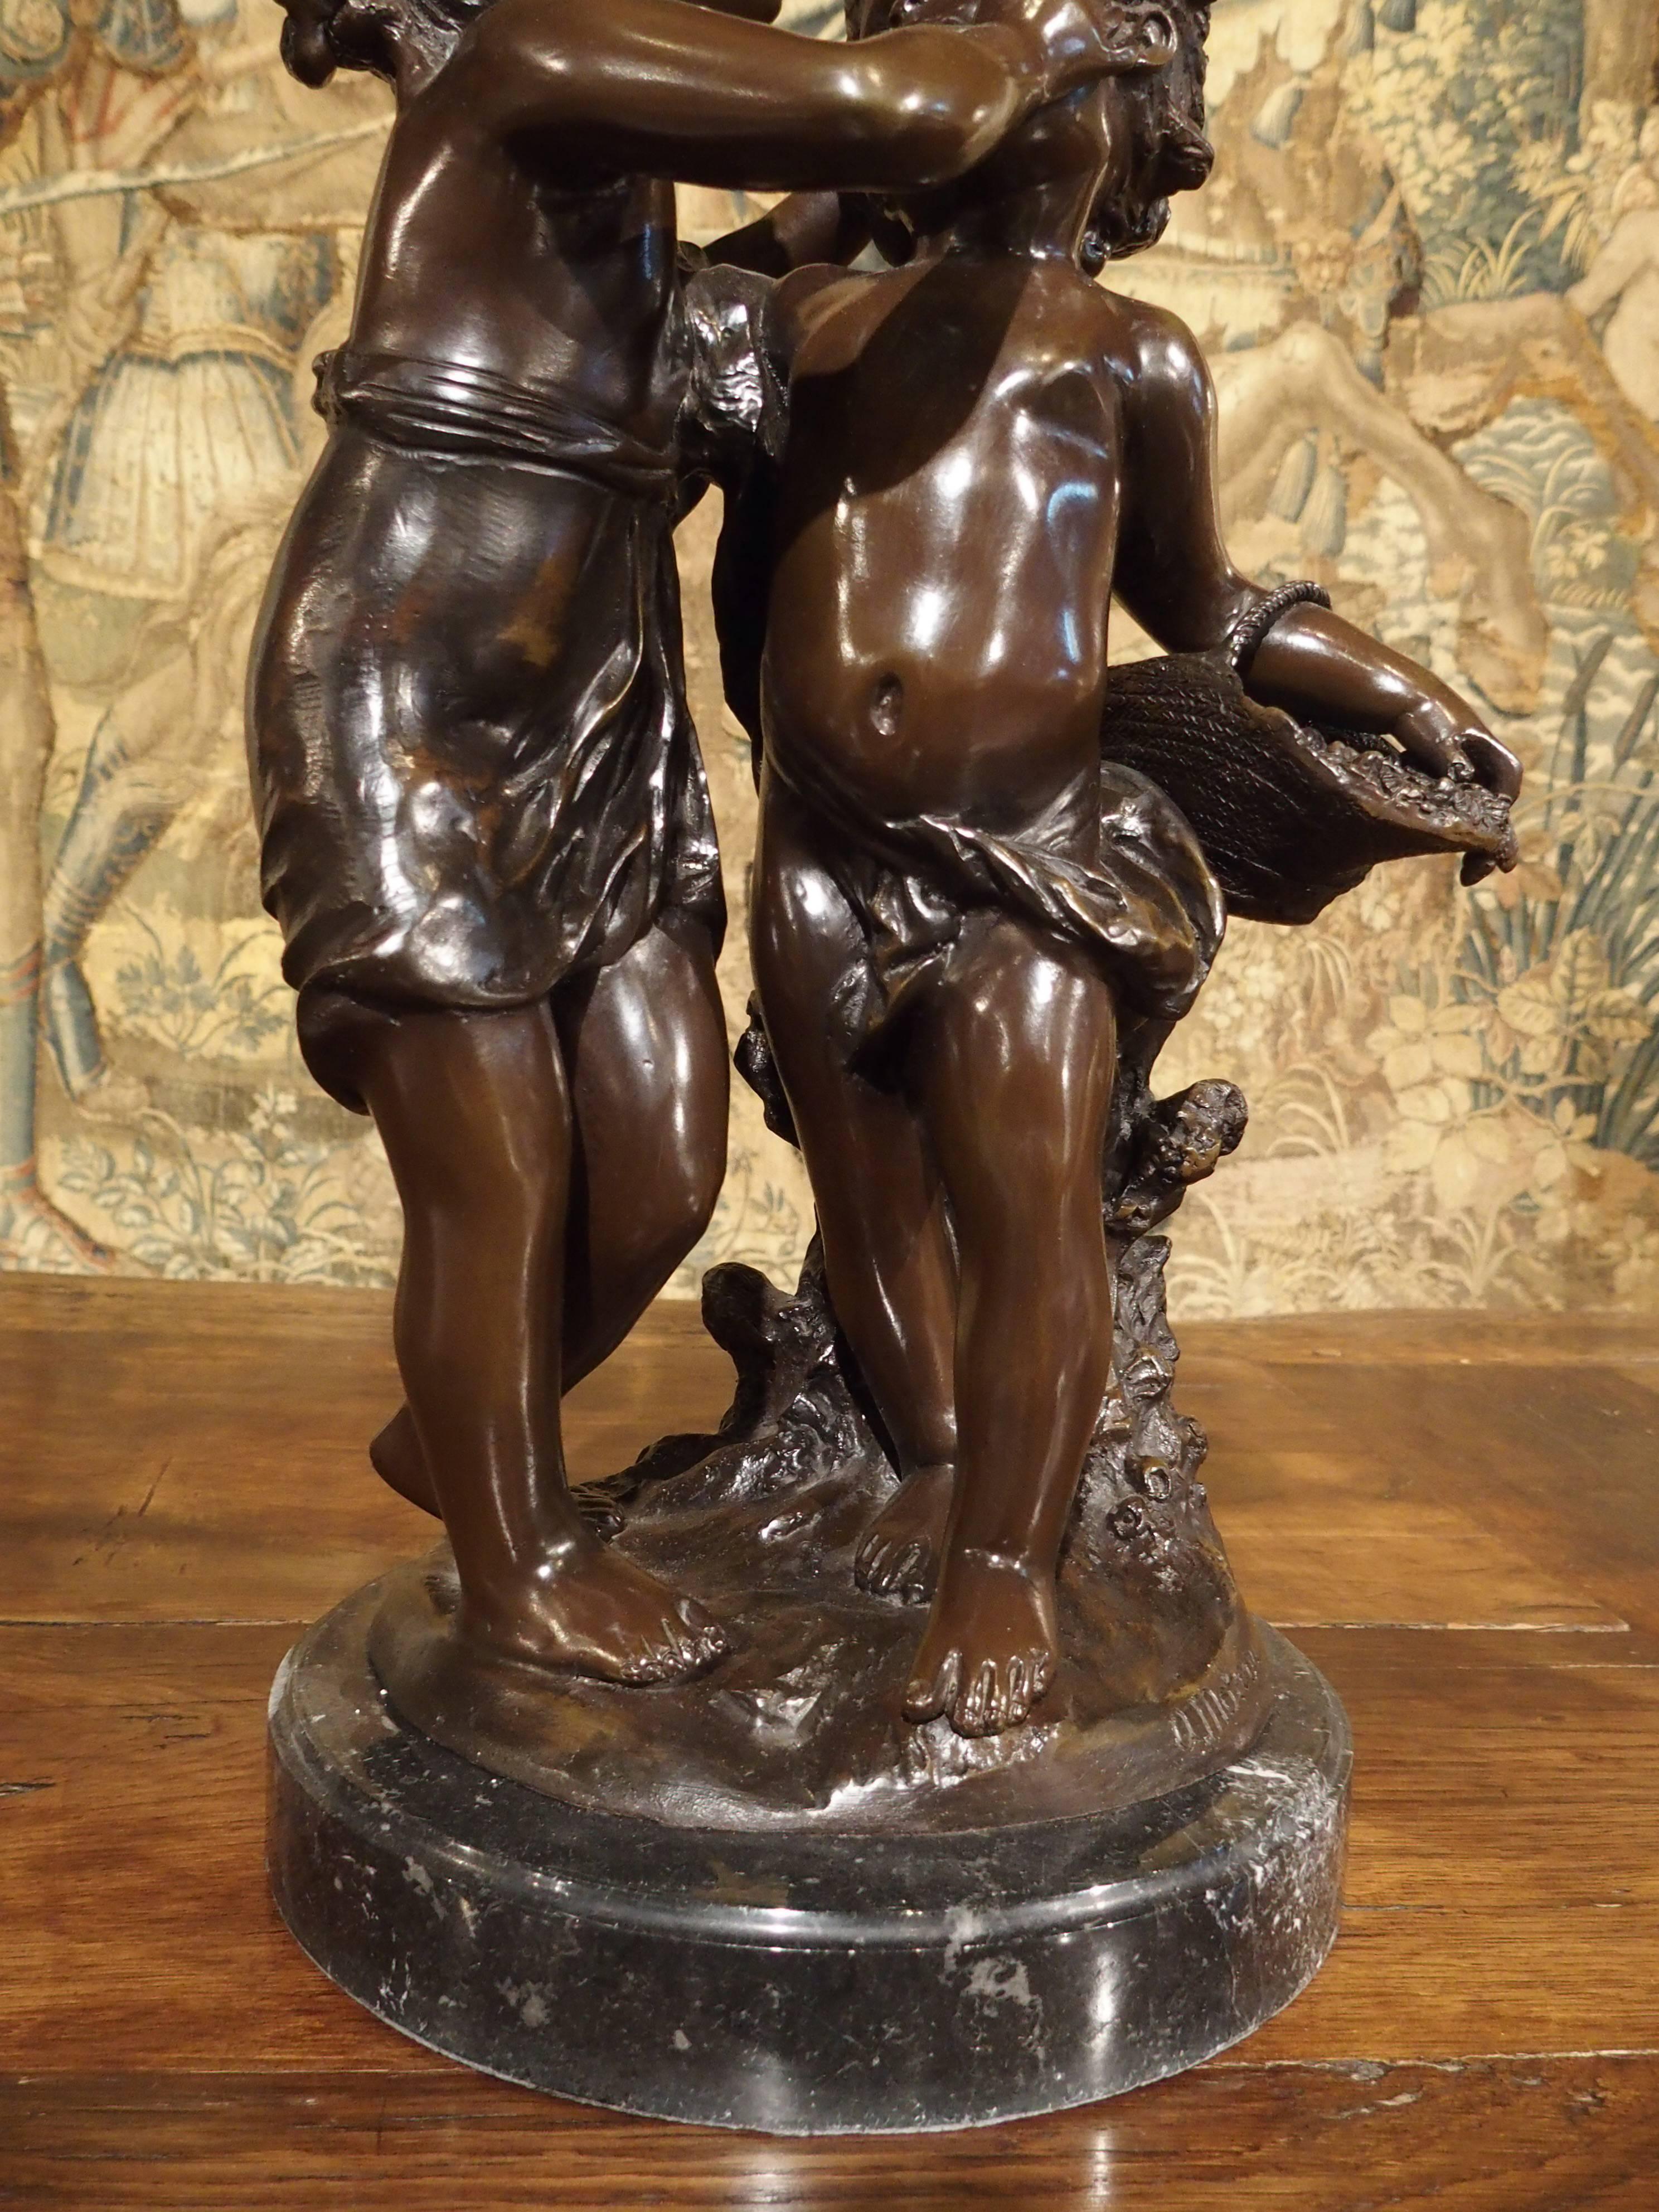 This French bronze features a little girl graciously kissing a younger boy’s forehead. He is leaning against a tree trunk holding a basket of flowers for her. The original was executed by Auguste Moreau in France, in the late 1800s or early 1900s.